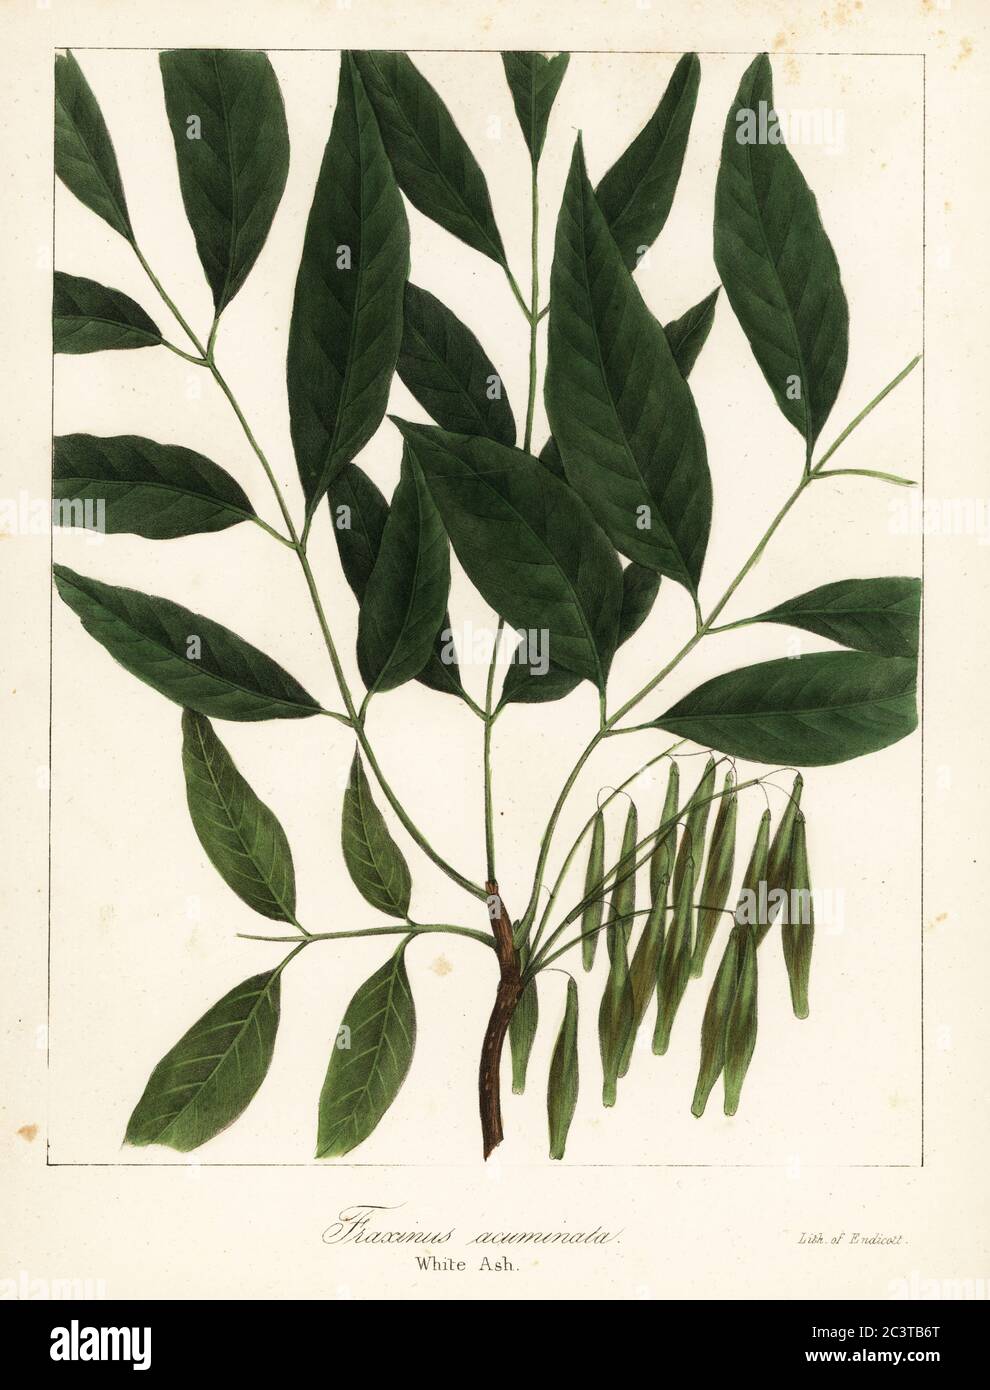 American ash, Fraxinus americana (White ash, Fraxinus acuminata). Critically endangered. Handcoloured lithograph by Endicott after a botanical illustration from John Torrey’s A Flora of the State of New York, Carroll and Cook, Albany, 1843. The plates drawn by John Torrey, Agnes Mitchell, Elizabeth Paoley and Swinton. John Torrey was an American botanist, chemist and physician 1796-1873. Stock Photo